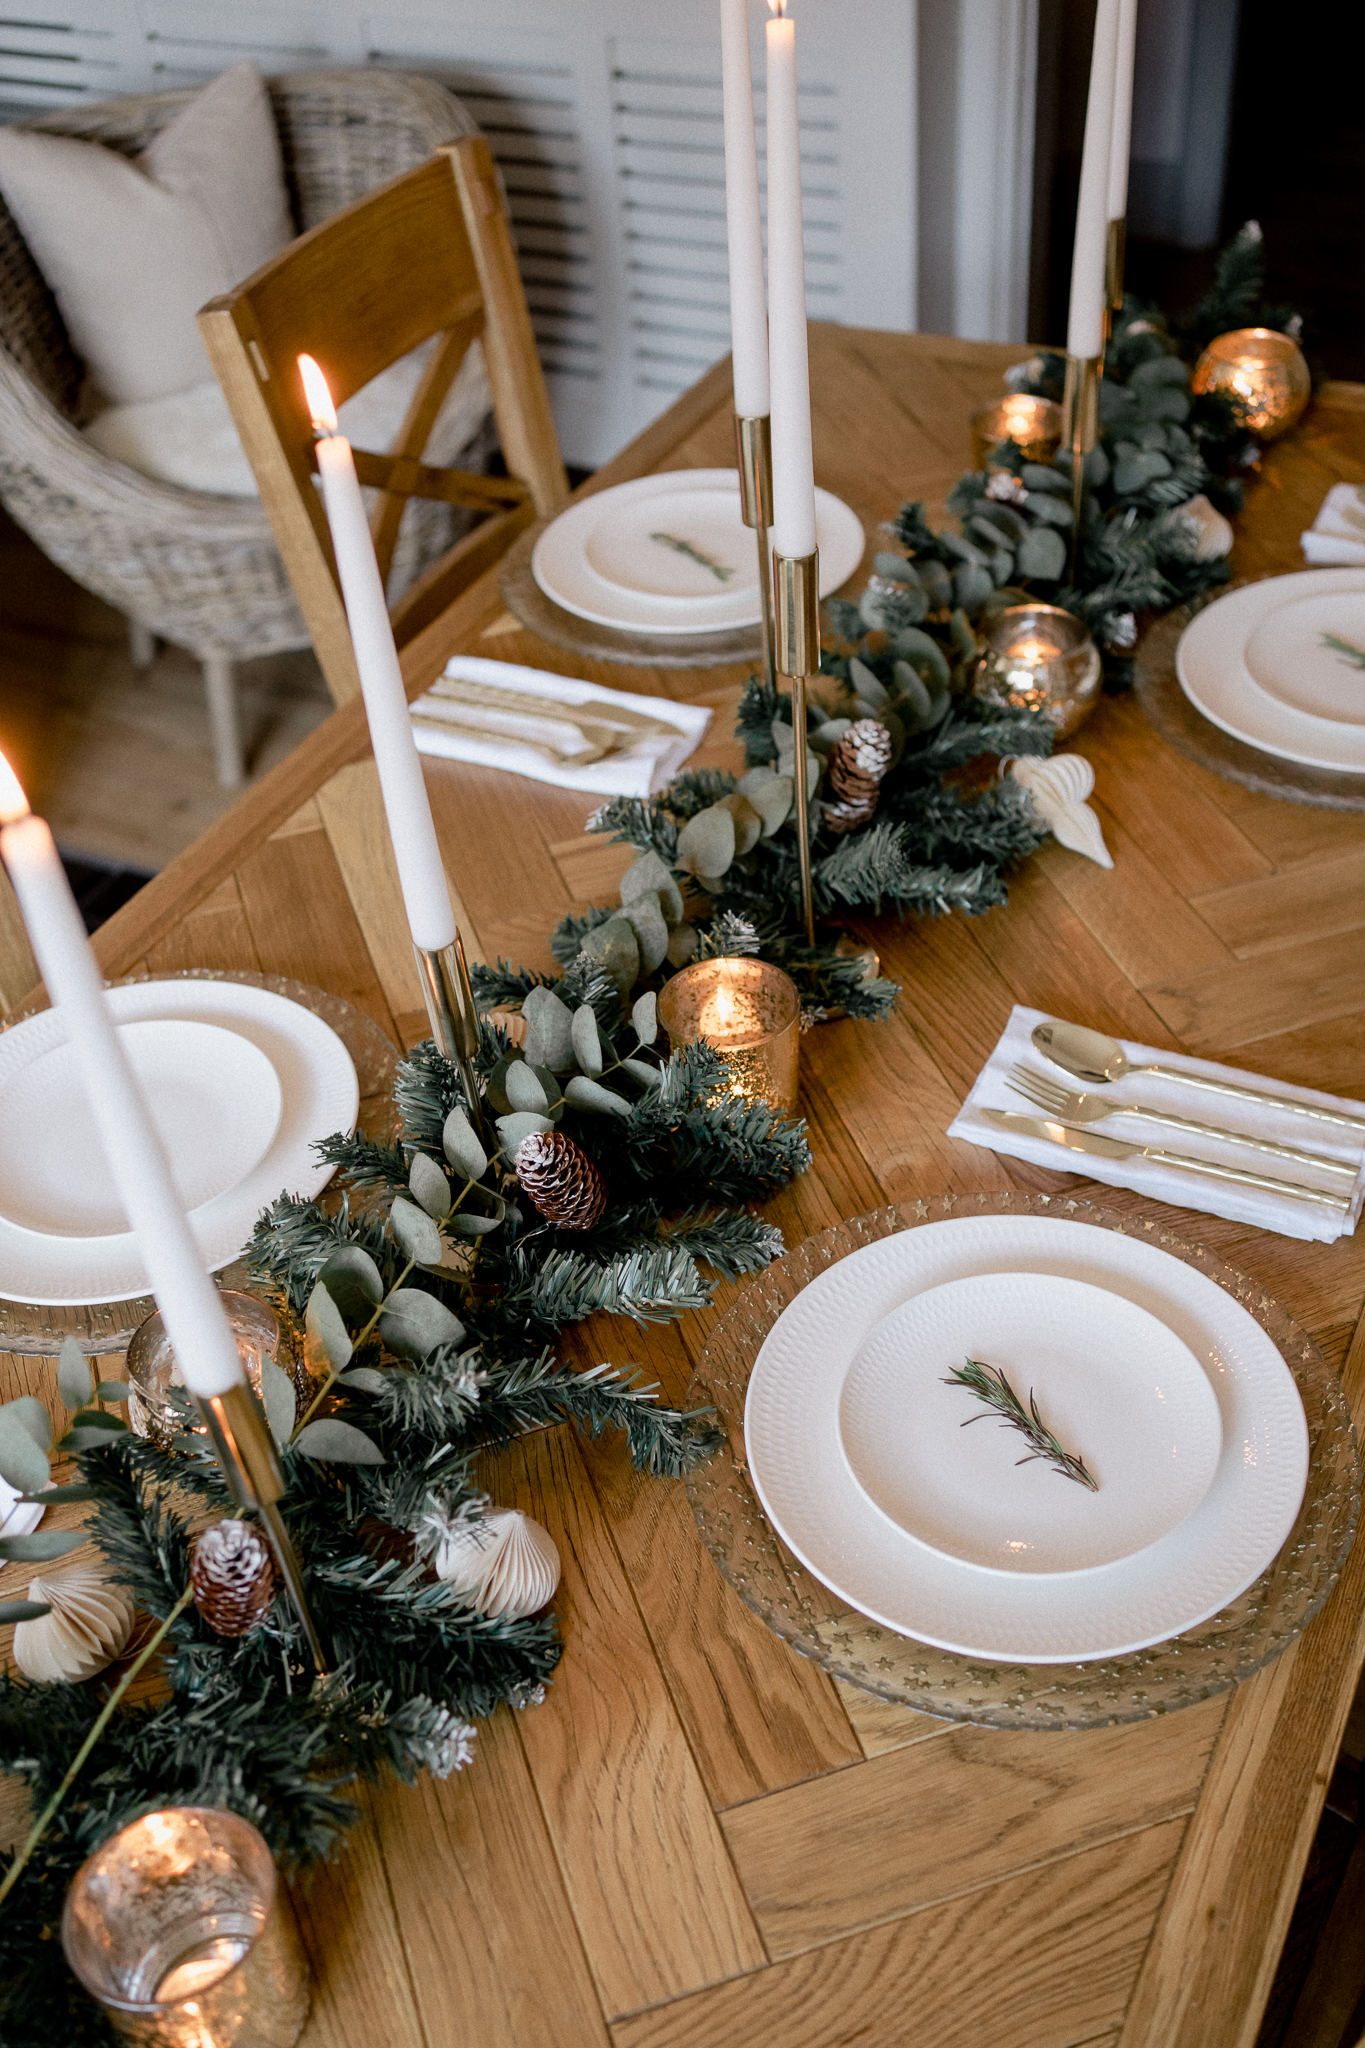 How to style your dining room for Christmas